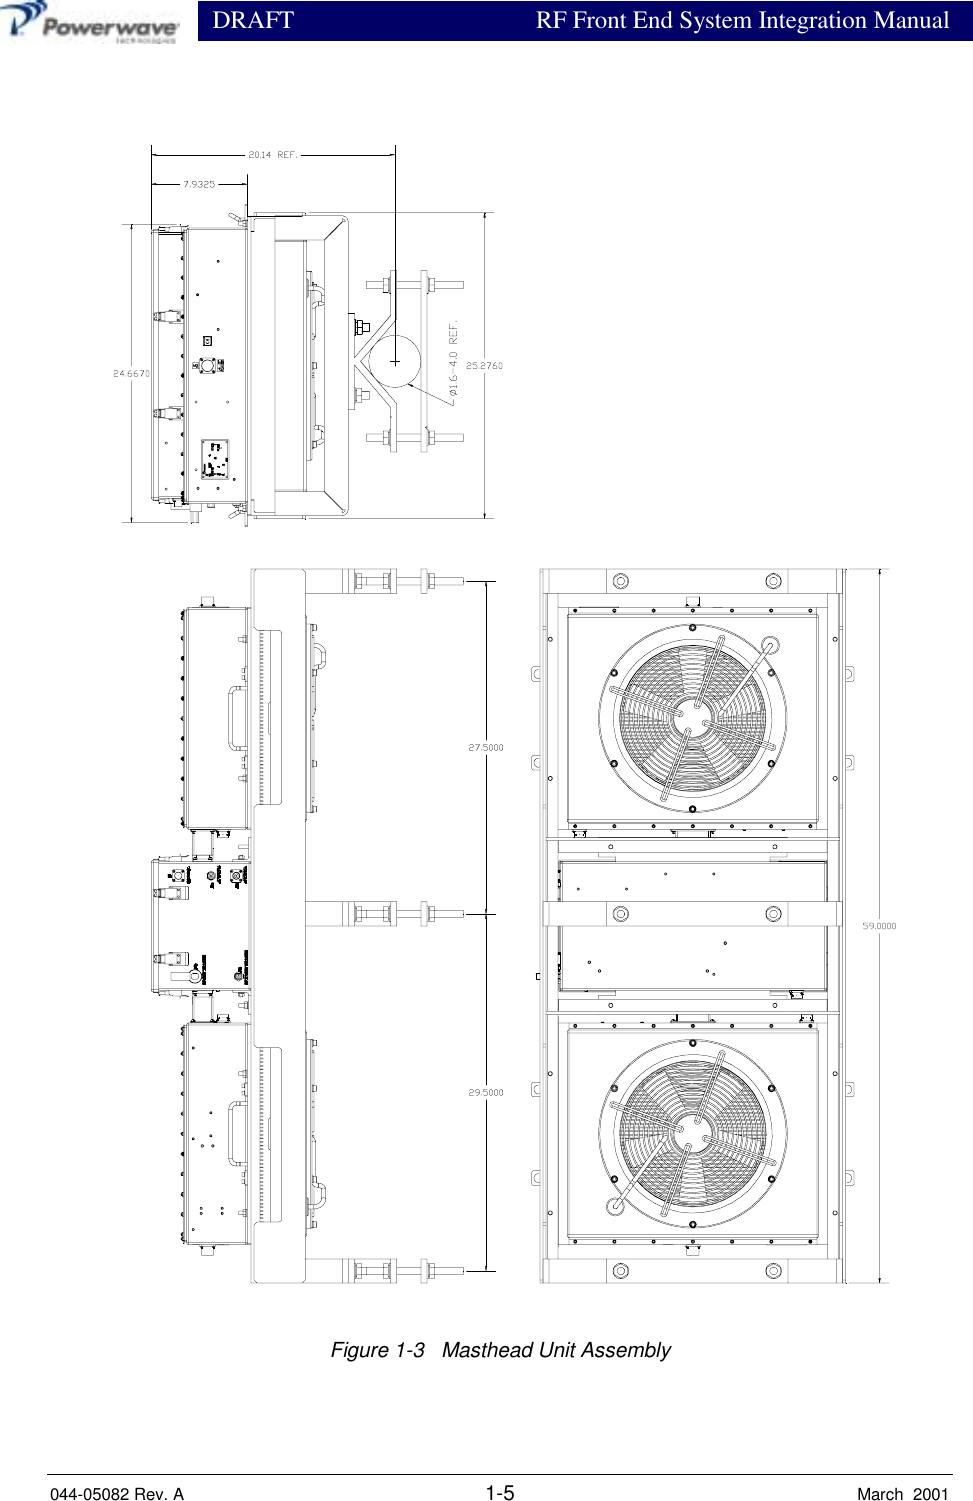                  DRAFT RF Front End System Integration Manual044-05082 Rev. A 1-5 March  2001Figure 1-3   Masthead Unit Assembly